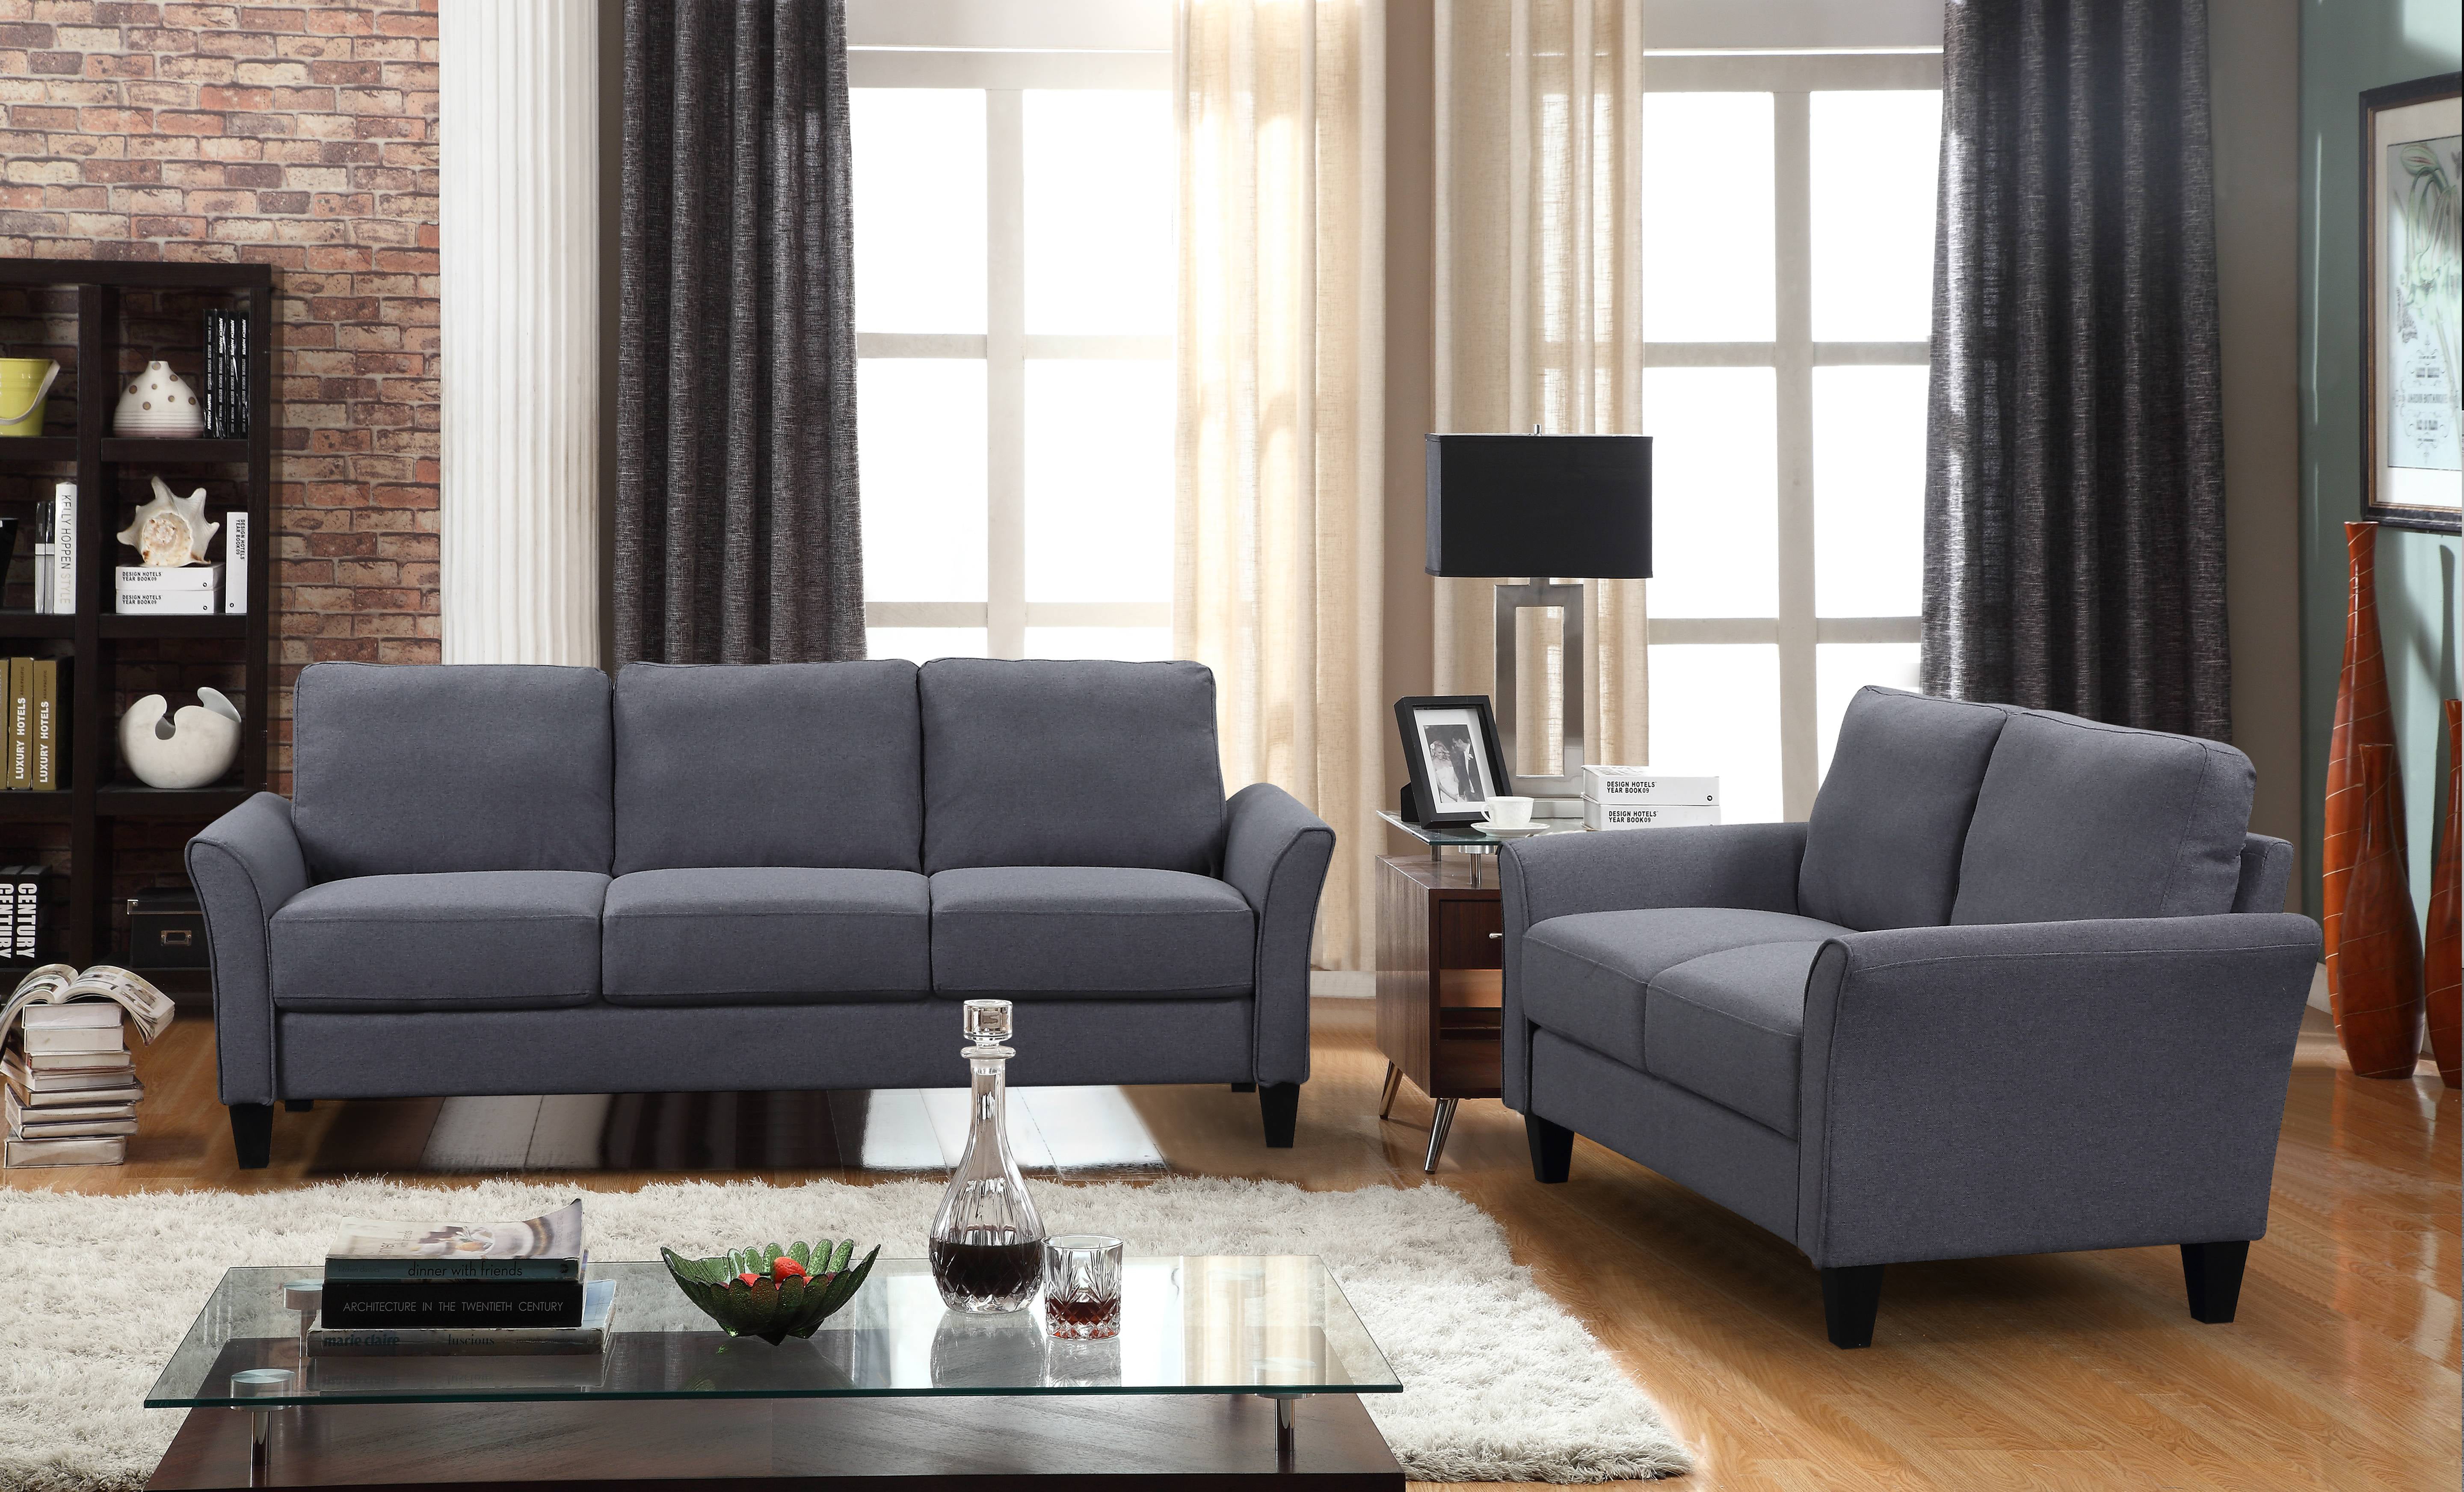 3 Seater Sofa For Small Living Room